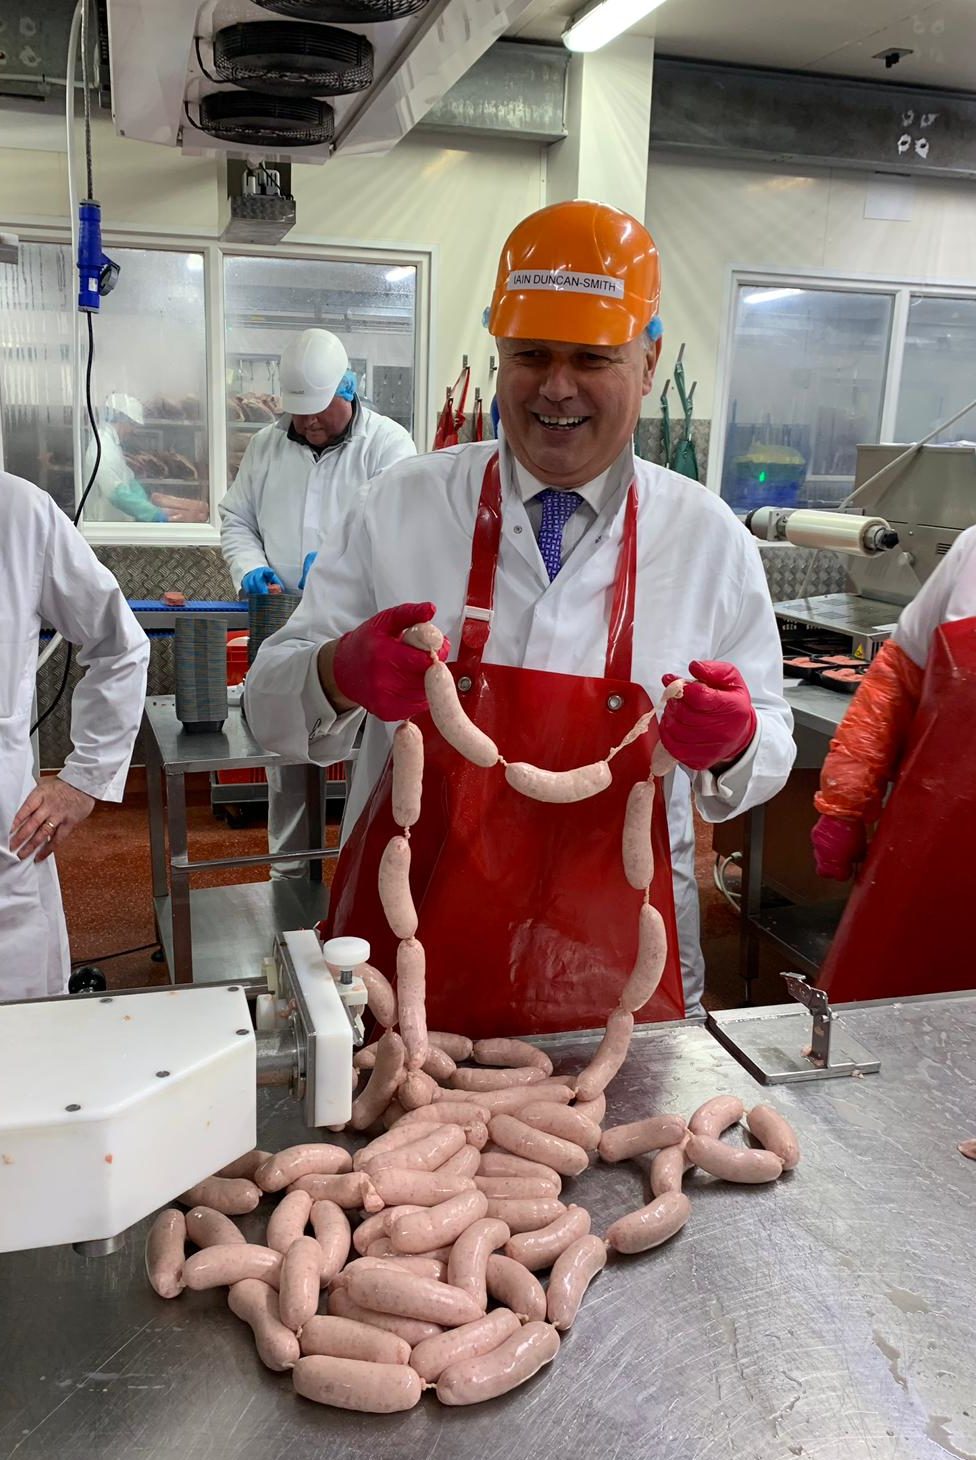 Iain Duncan Smith visited the Inverurie HQ of butcher Donald Russell.